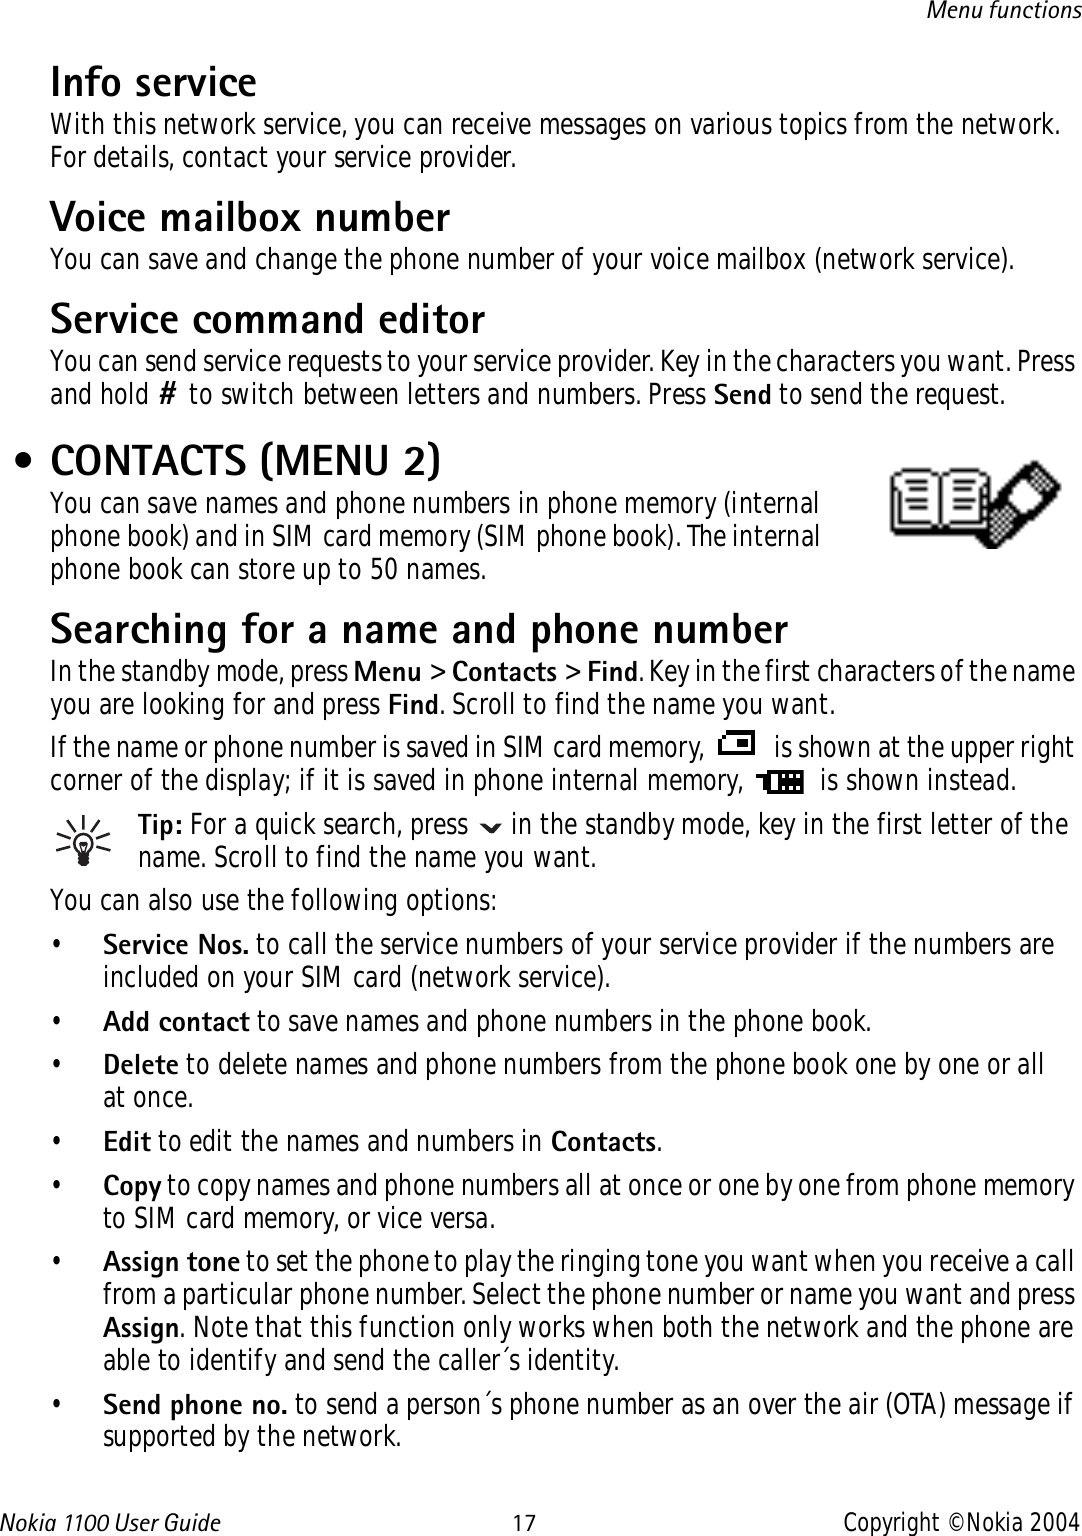 Nokia 110 0  User Guide 17 Copyright © Nokia 2004Menu functionsInfo service With this network service, you can receive messages on various topics from the network. For details, contact your service provider.Voice mailbox number You can save and change the phone number of your voice mailbox (network service). Service command editorYou can send service requests to your service provider. Key in the characters you want. Press and hold # to switch between letters and numbers. Press Send to send the request. • CONTACTS (MENU 2)You can save names and phone numbers in phone memory (internal phone book) and in SIM card memory (SIM phone book). The internal phone book can store up to 50 names.Searching for a name and phone numberIn the standby mode, press Menu &gt; Contacts &gt; Find. Key in the first characters of the name you are looking for and press Find. Scroll to find the name you want.If the name or phone number is saved in SIM card memory,   is shown at the upper right corner of the display; if it is saved in phone internal memory,   is shown instead.Tip: For a quick search, press   in the standby mode, key in the first letter of the name. Scroll to find the name you want.You can also use the following options:•Service Nos. to call the service numbers of your service provider if the numbers are included on your SIM card (network service).•Add contact to save names and phone numbers in the phone book. •Delete to delete names and phone numbers from the phone book one by one or all at once. •Edit to edit the names and numbers in Contacts.•Copy to copy names and phone numbers all at once or one by one from phone memory to SIM card memory, or vice versa.•Assign tone to set the phone to play the ringing tone you want when you receive a call from a particular phone number. Select the phone number or name you want and press Assign. Note that this function only works when both the network and the phone are able to identify and send the caller´s identity. •Send phone no. to send a person´s phone number as an over the air (OTA) message if supported by the network. 